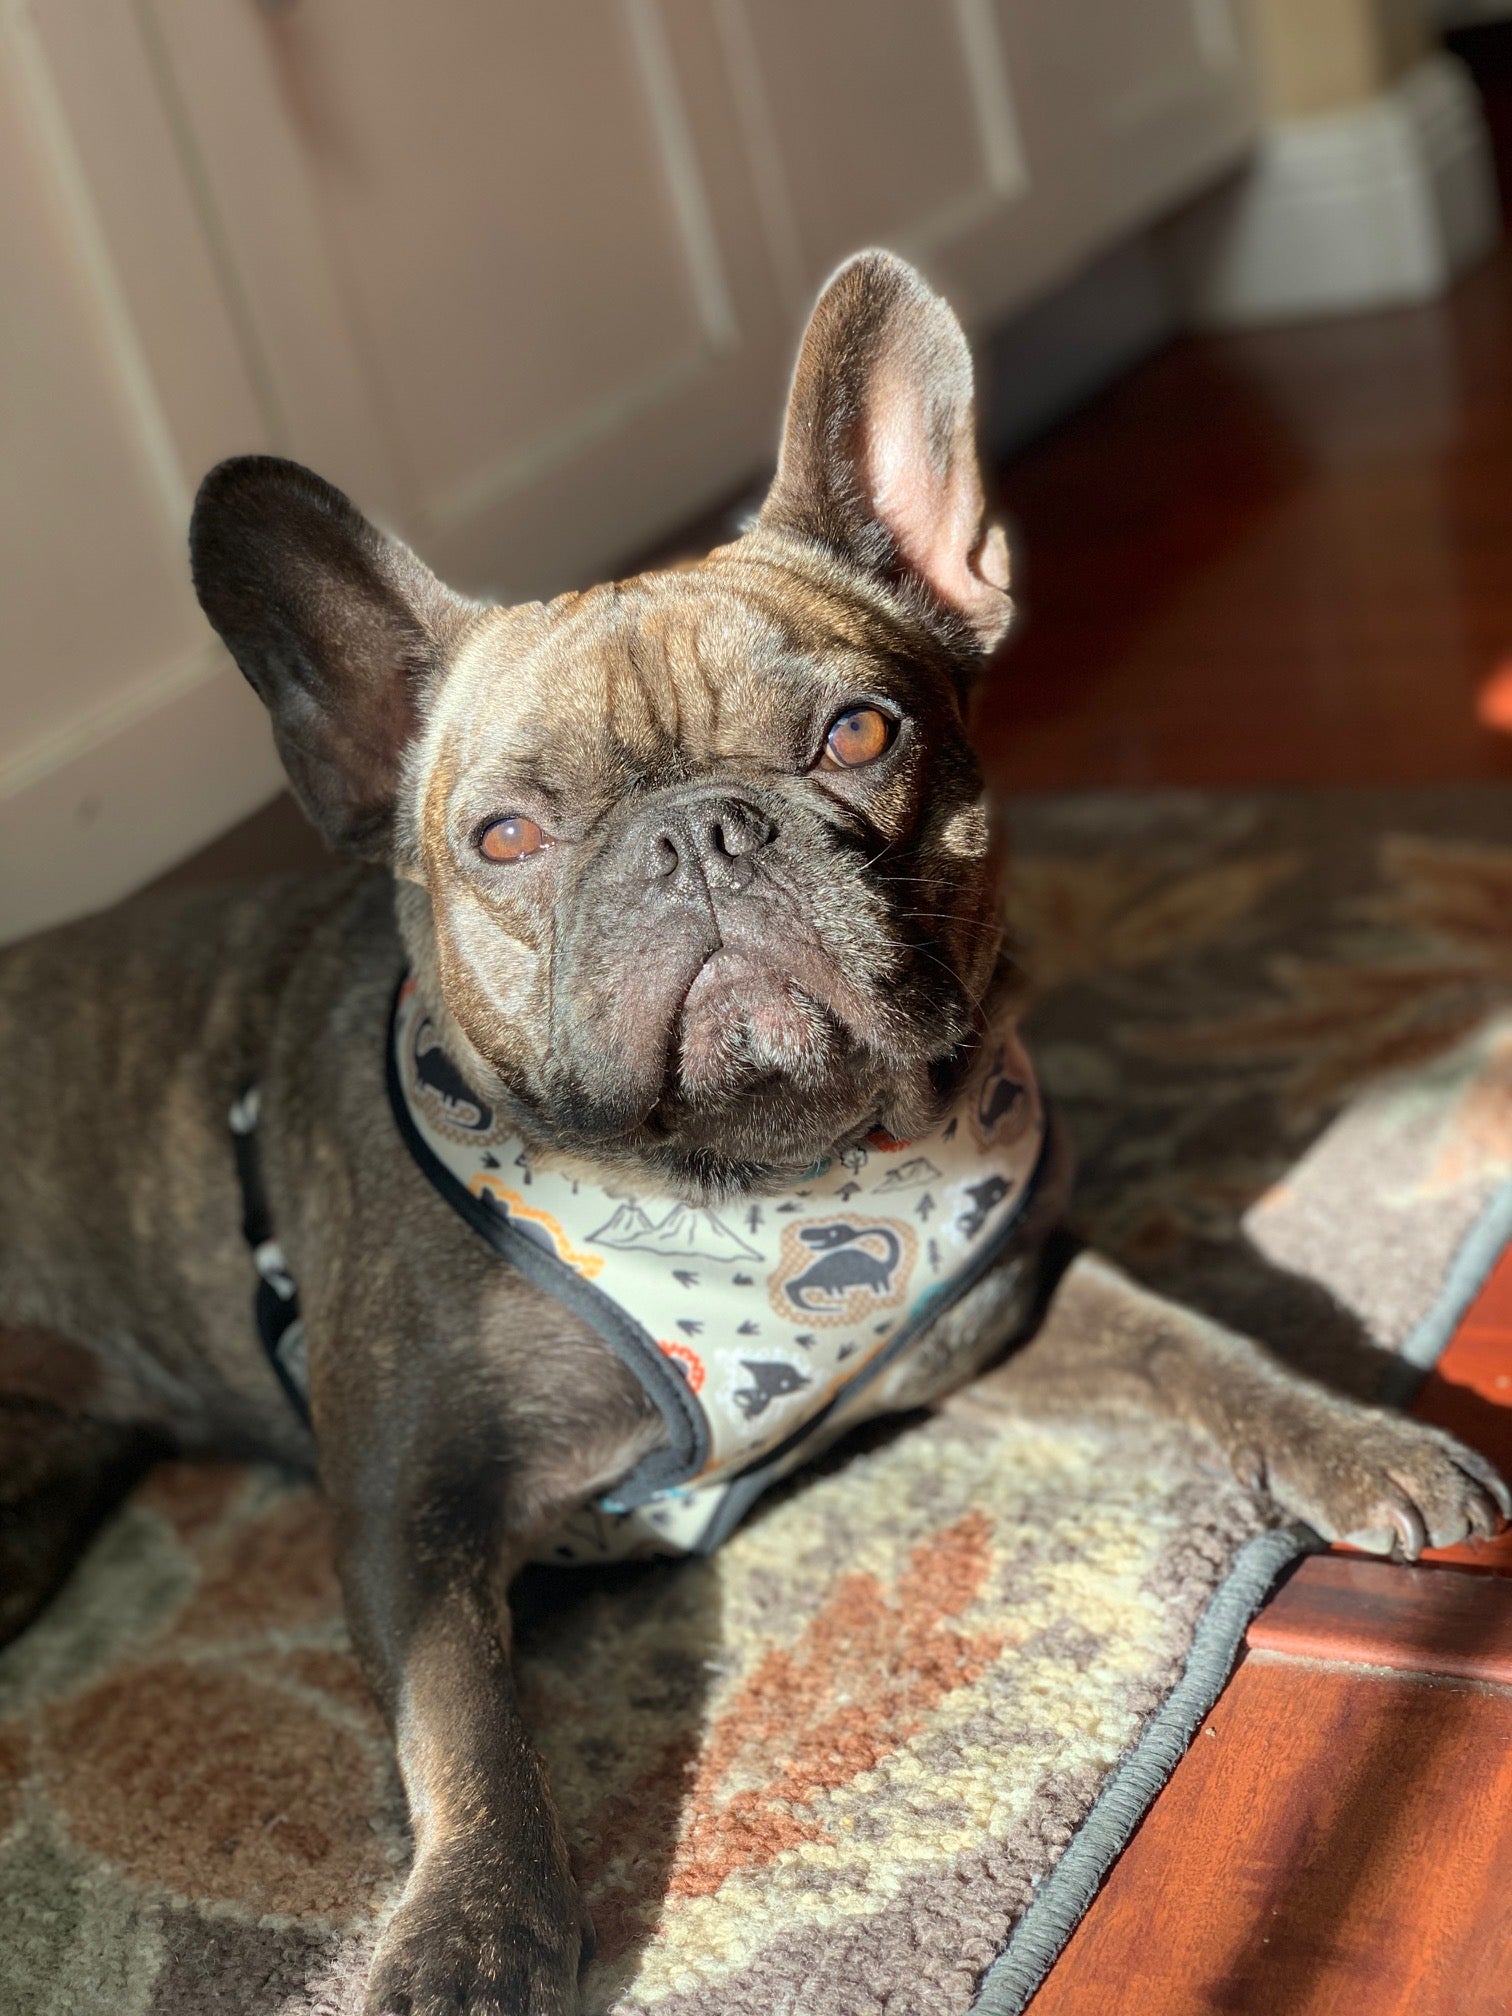 What Are French Bulldogs Bred For?